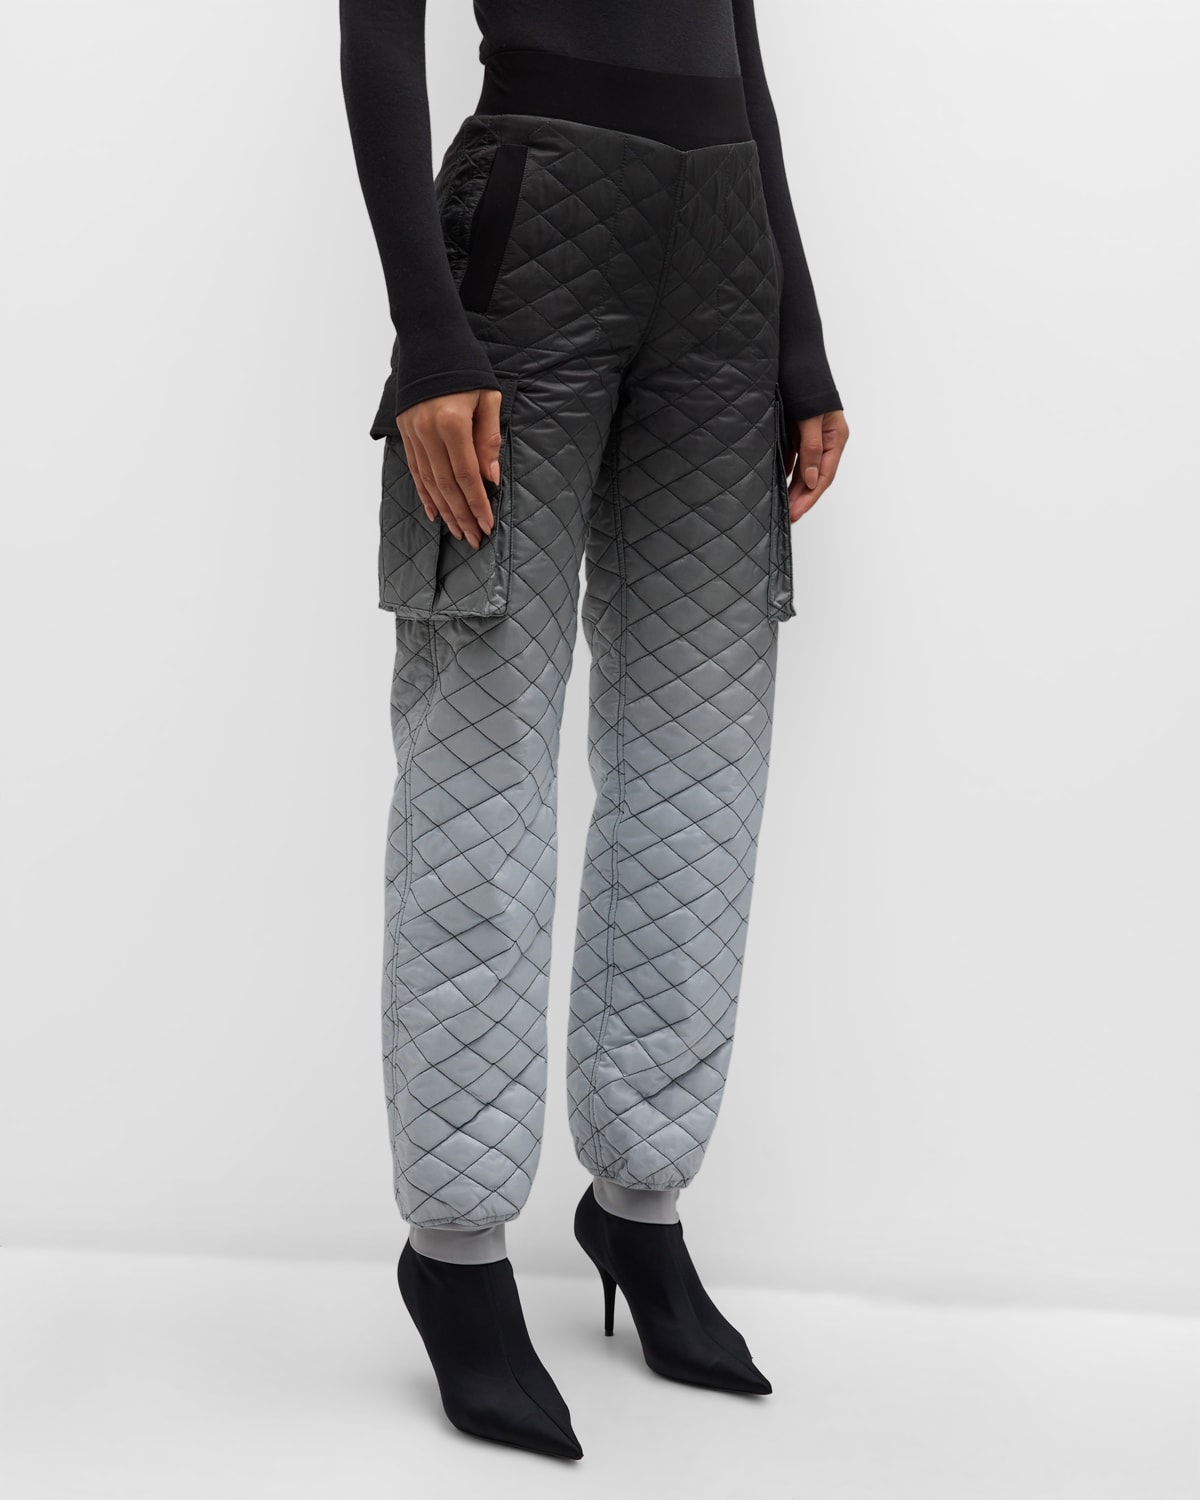 Norma Kamali Quilted Ombre Cargo Joggers In Black/grey